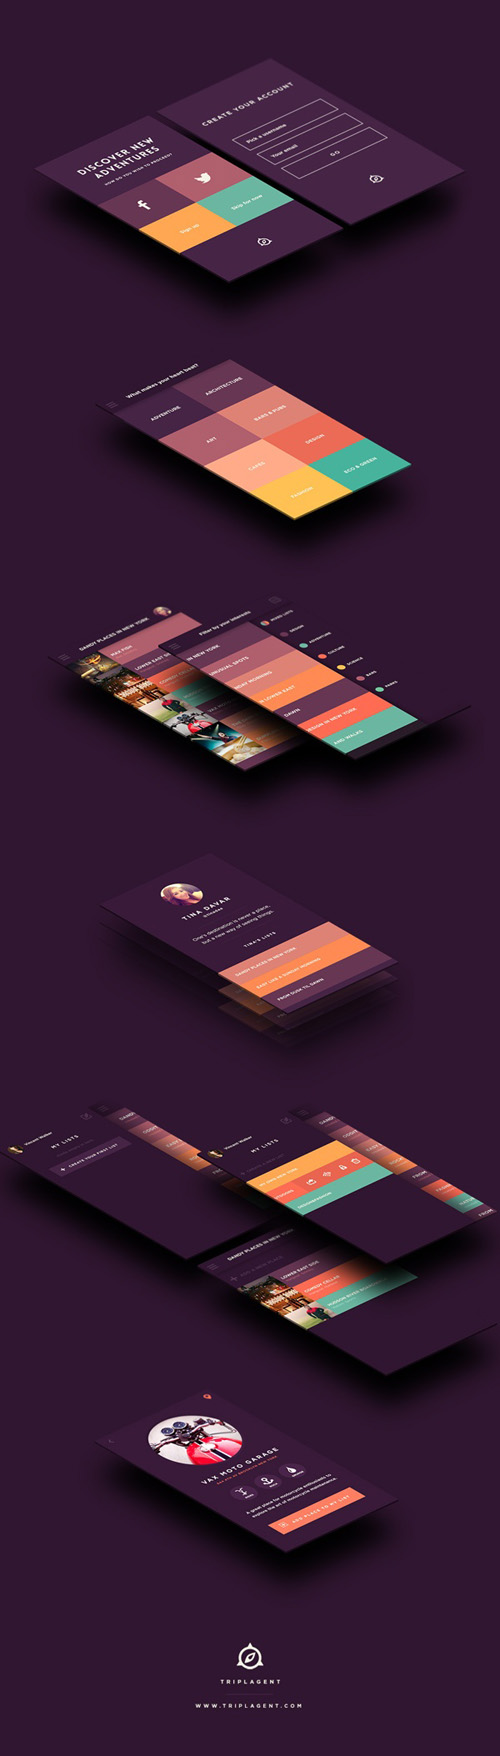 Flat Mobile UI Design and UX-14